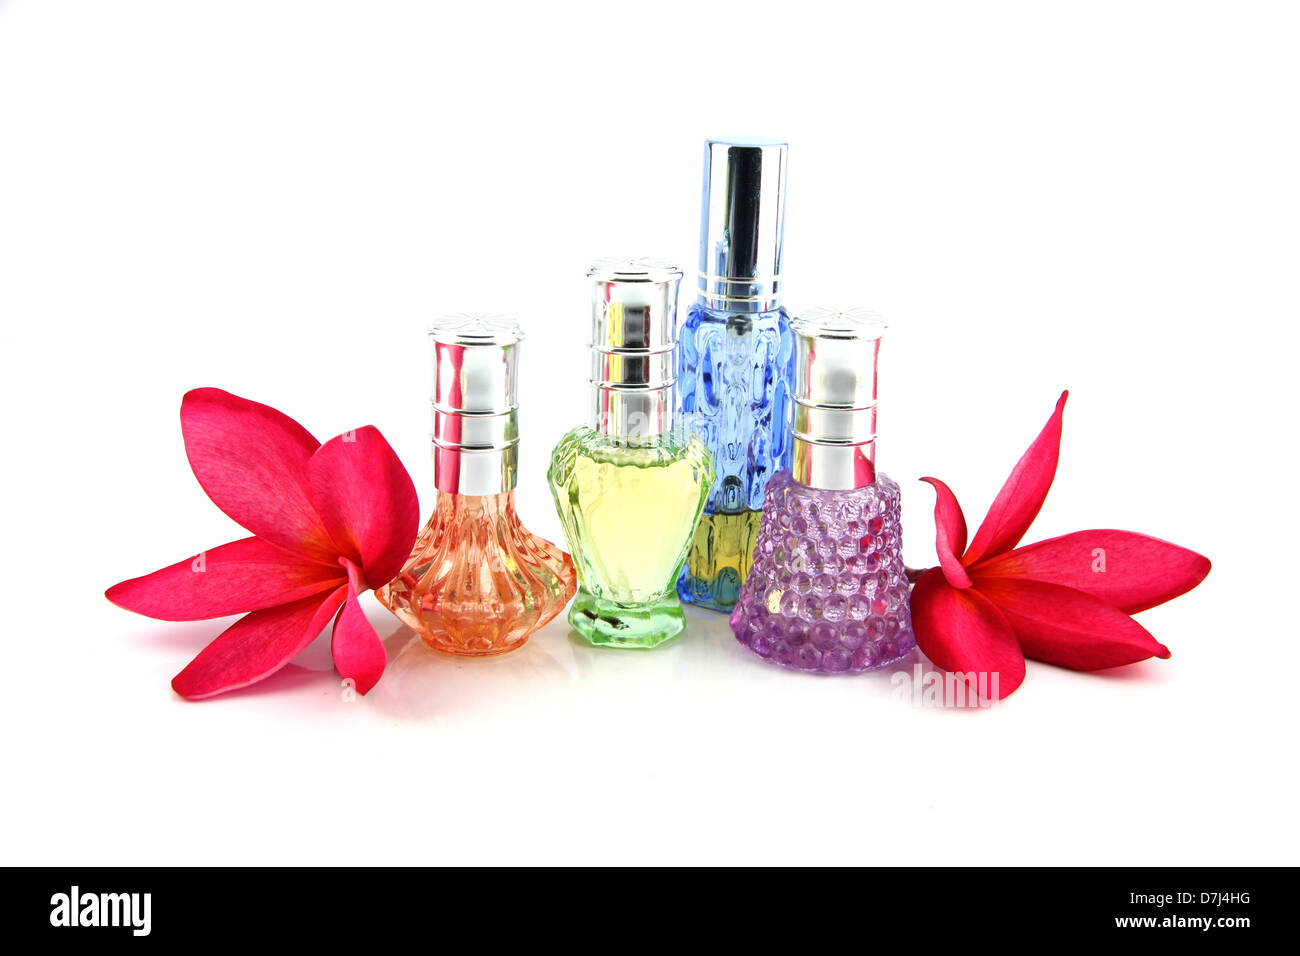 The Red flowers and Orange,Blue,Green,Violet Perfume bottles on the white background. Stock Photo